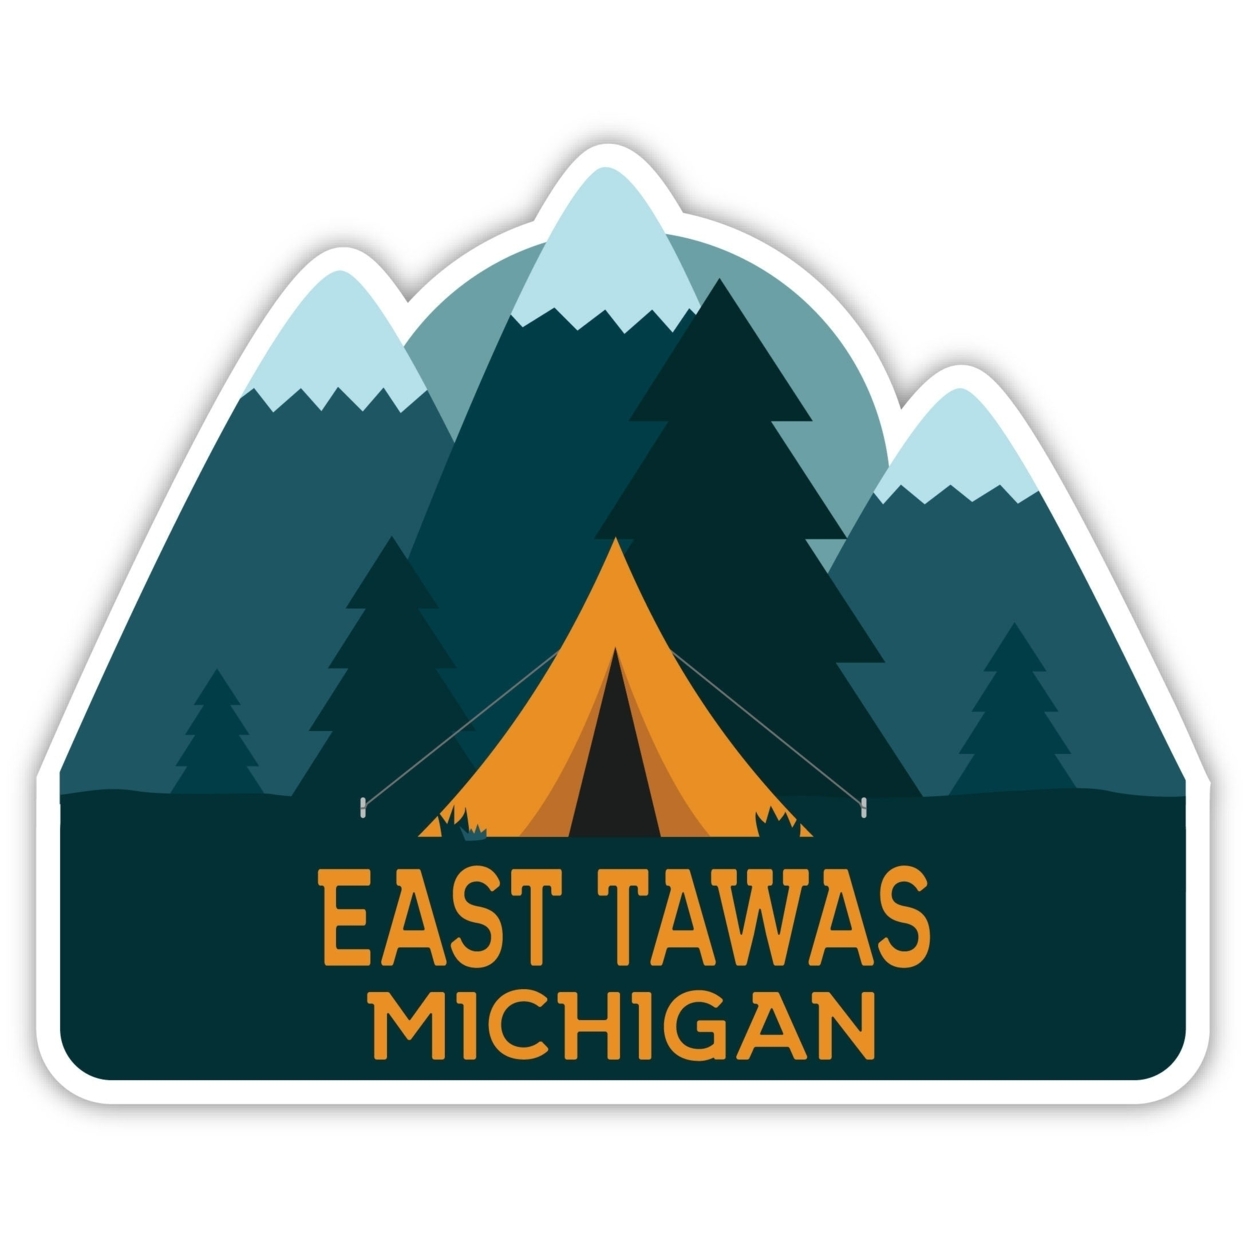 East Tawas Michigan Souvenir Decorative Stickers (Choose Theme And Size) - 4-Pack, 2-Inch, Adventures Awaits